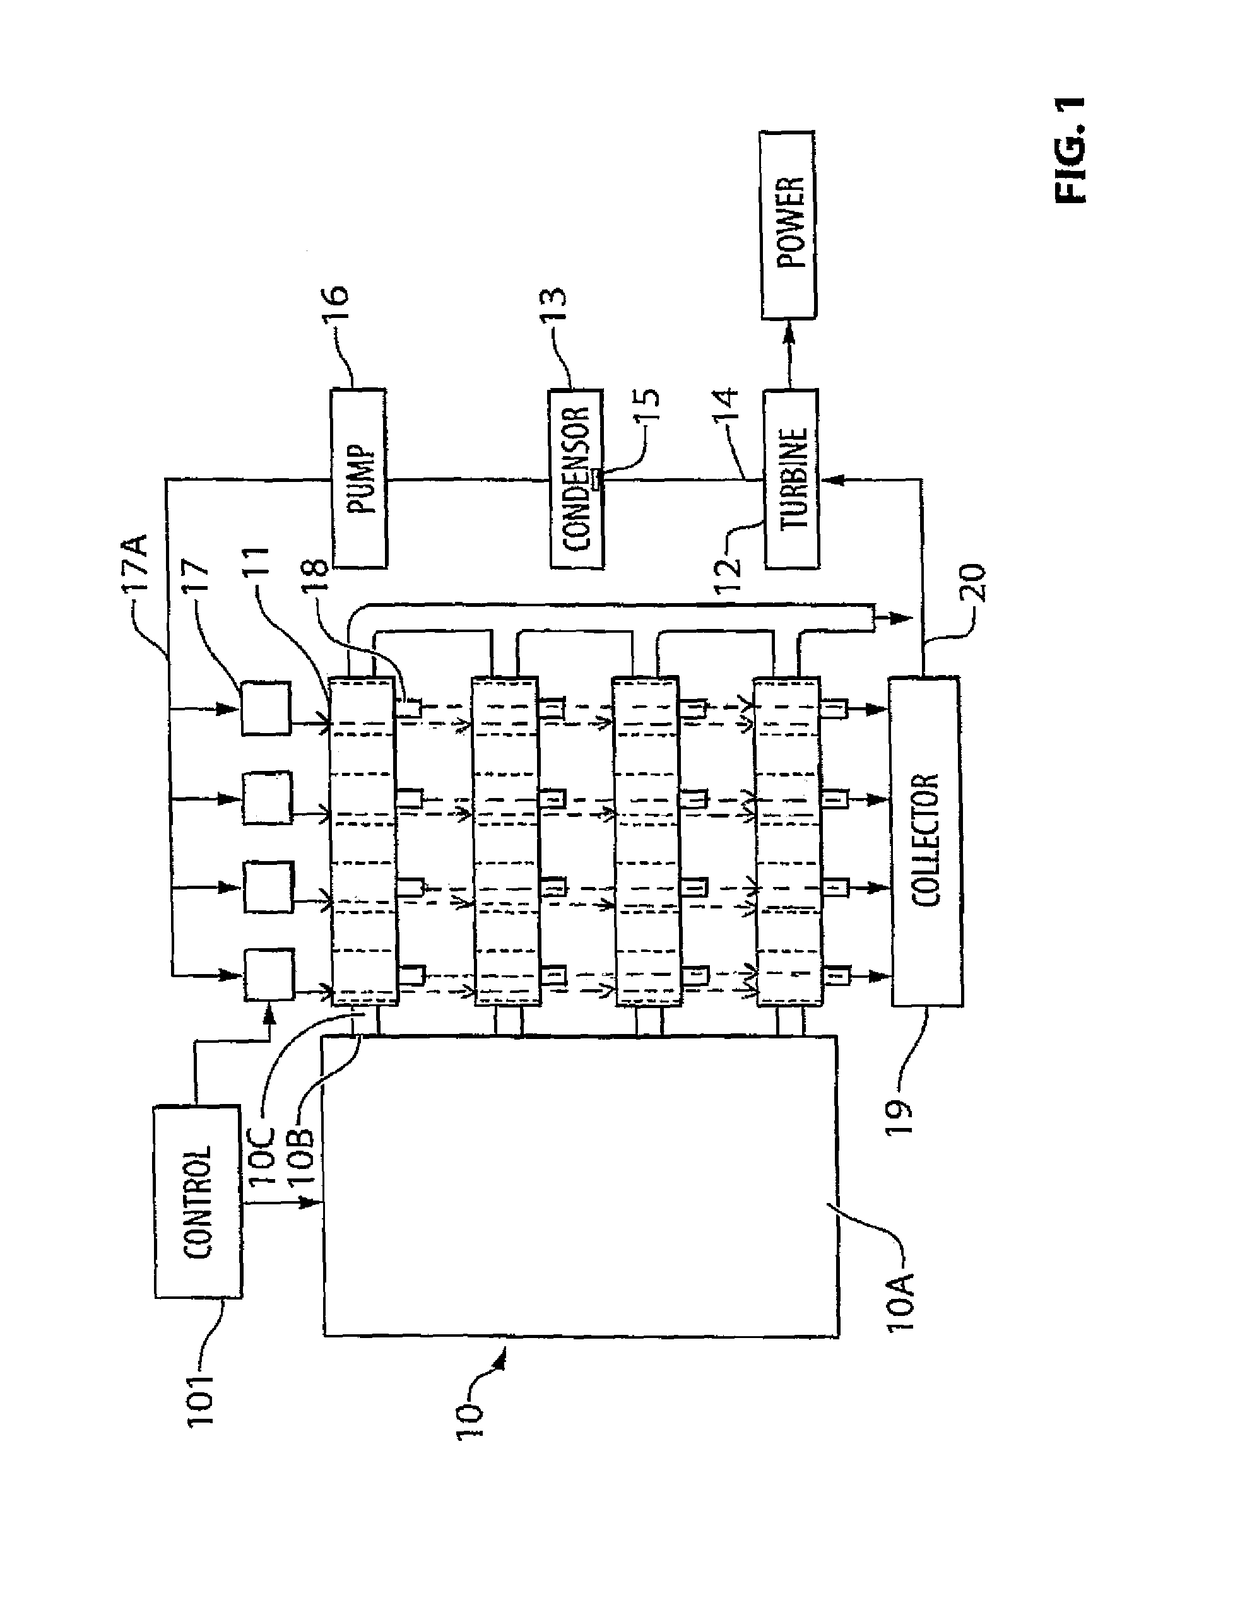 Method of steam generation by spraying water onto a duct within a chamber having divider walls